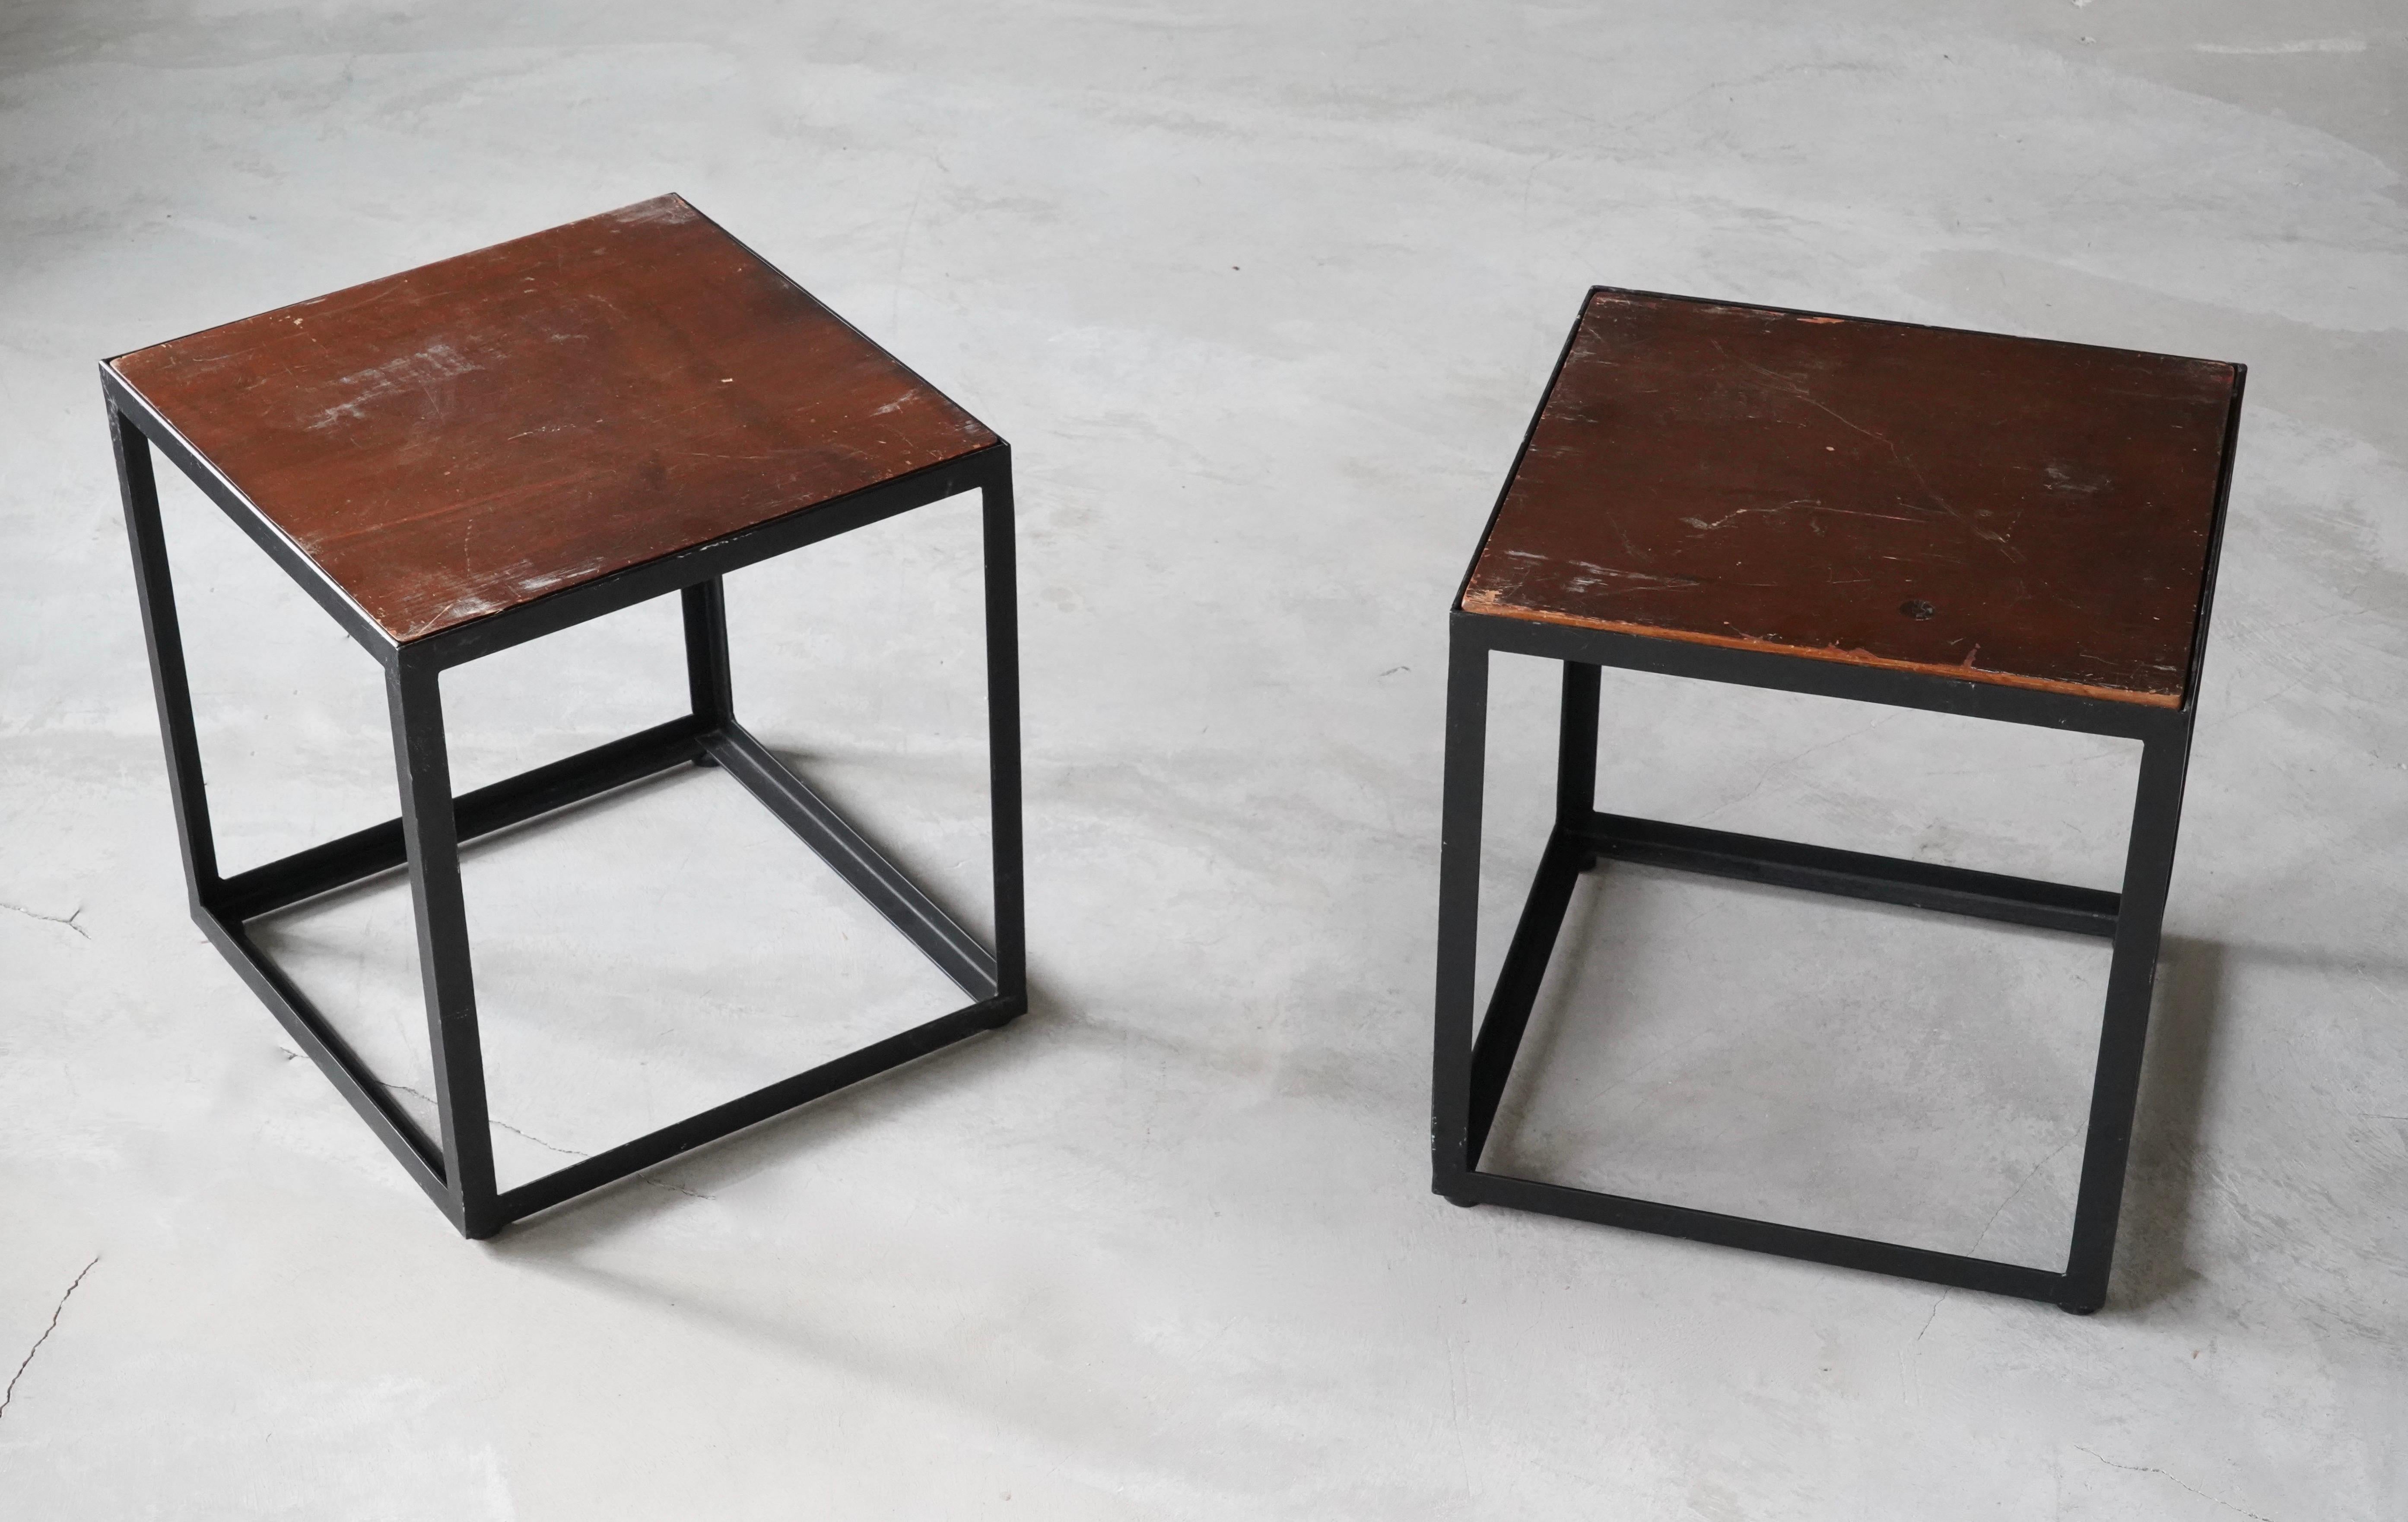 A set of two simple and functionalist side tables / occasional tables. In lacquered metal with wooden tops. Has dramatic original patina. Reversible wooden tops.

Other designers of the period include Poul Kjaerholm, Marcel Breuer, Pierre Chareau,